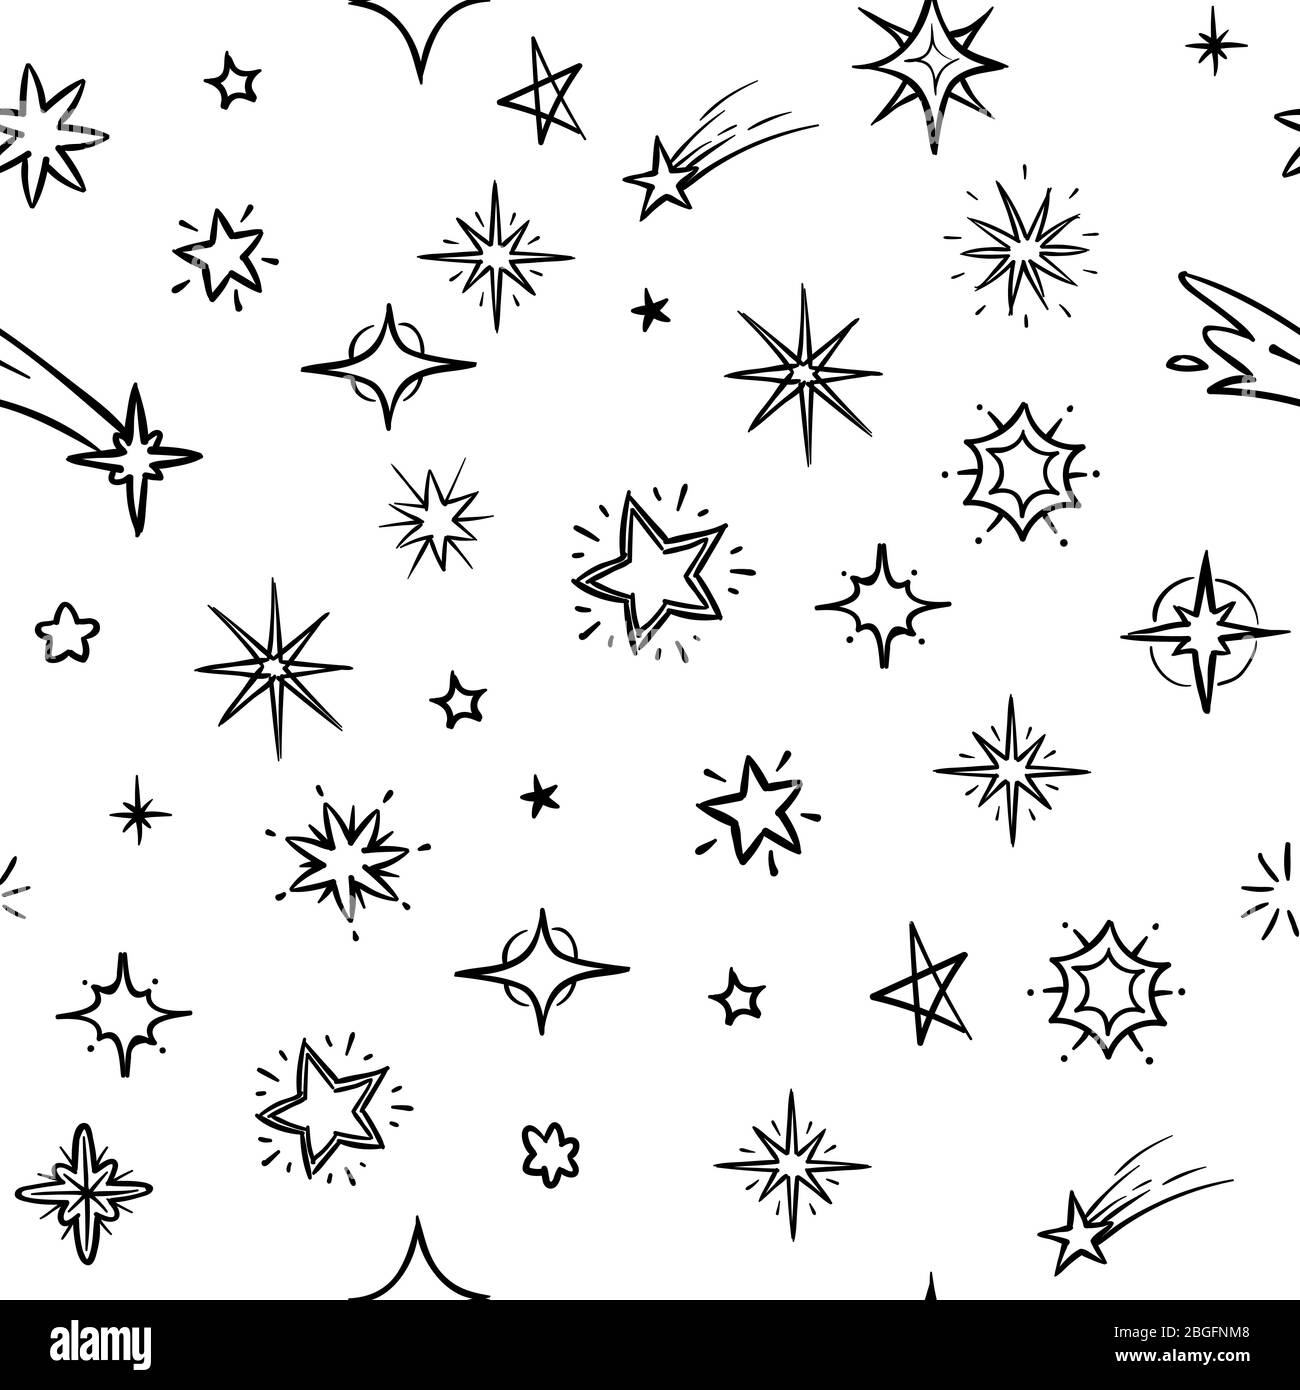 Hand drawn sky with doodle stars vector seamless background. Grunge outer space repeating pattern. Seamless sky star pattern sketch monochrome illustration Stock Vector